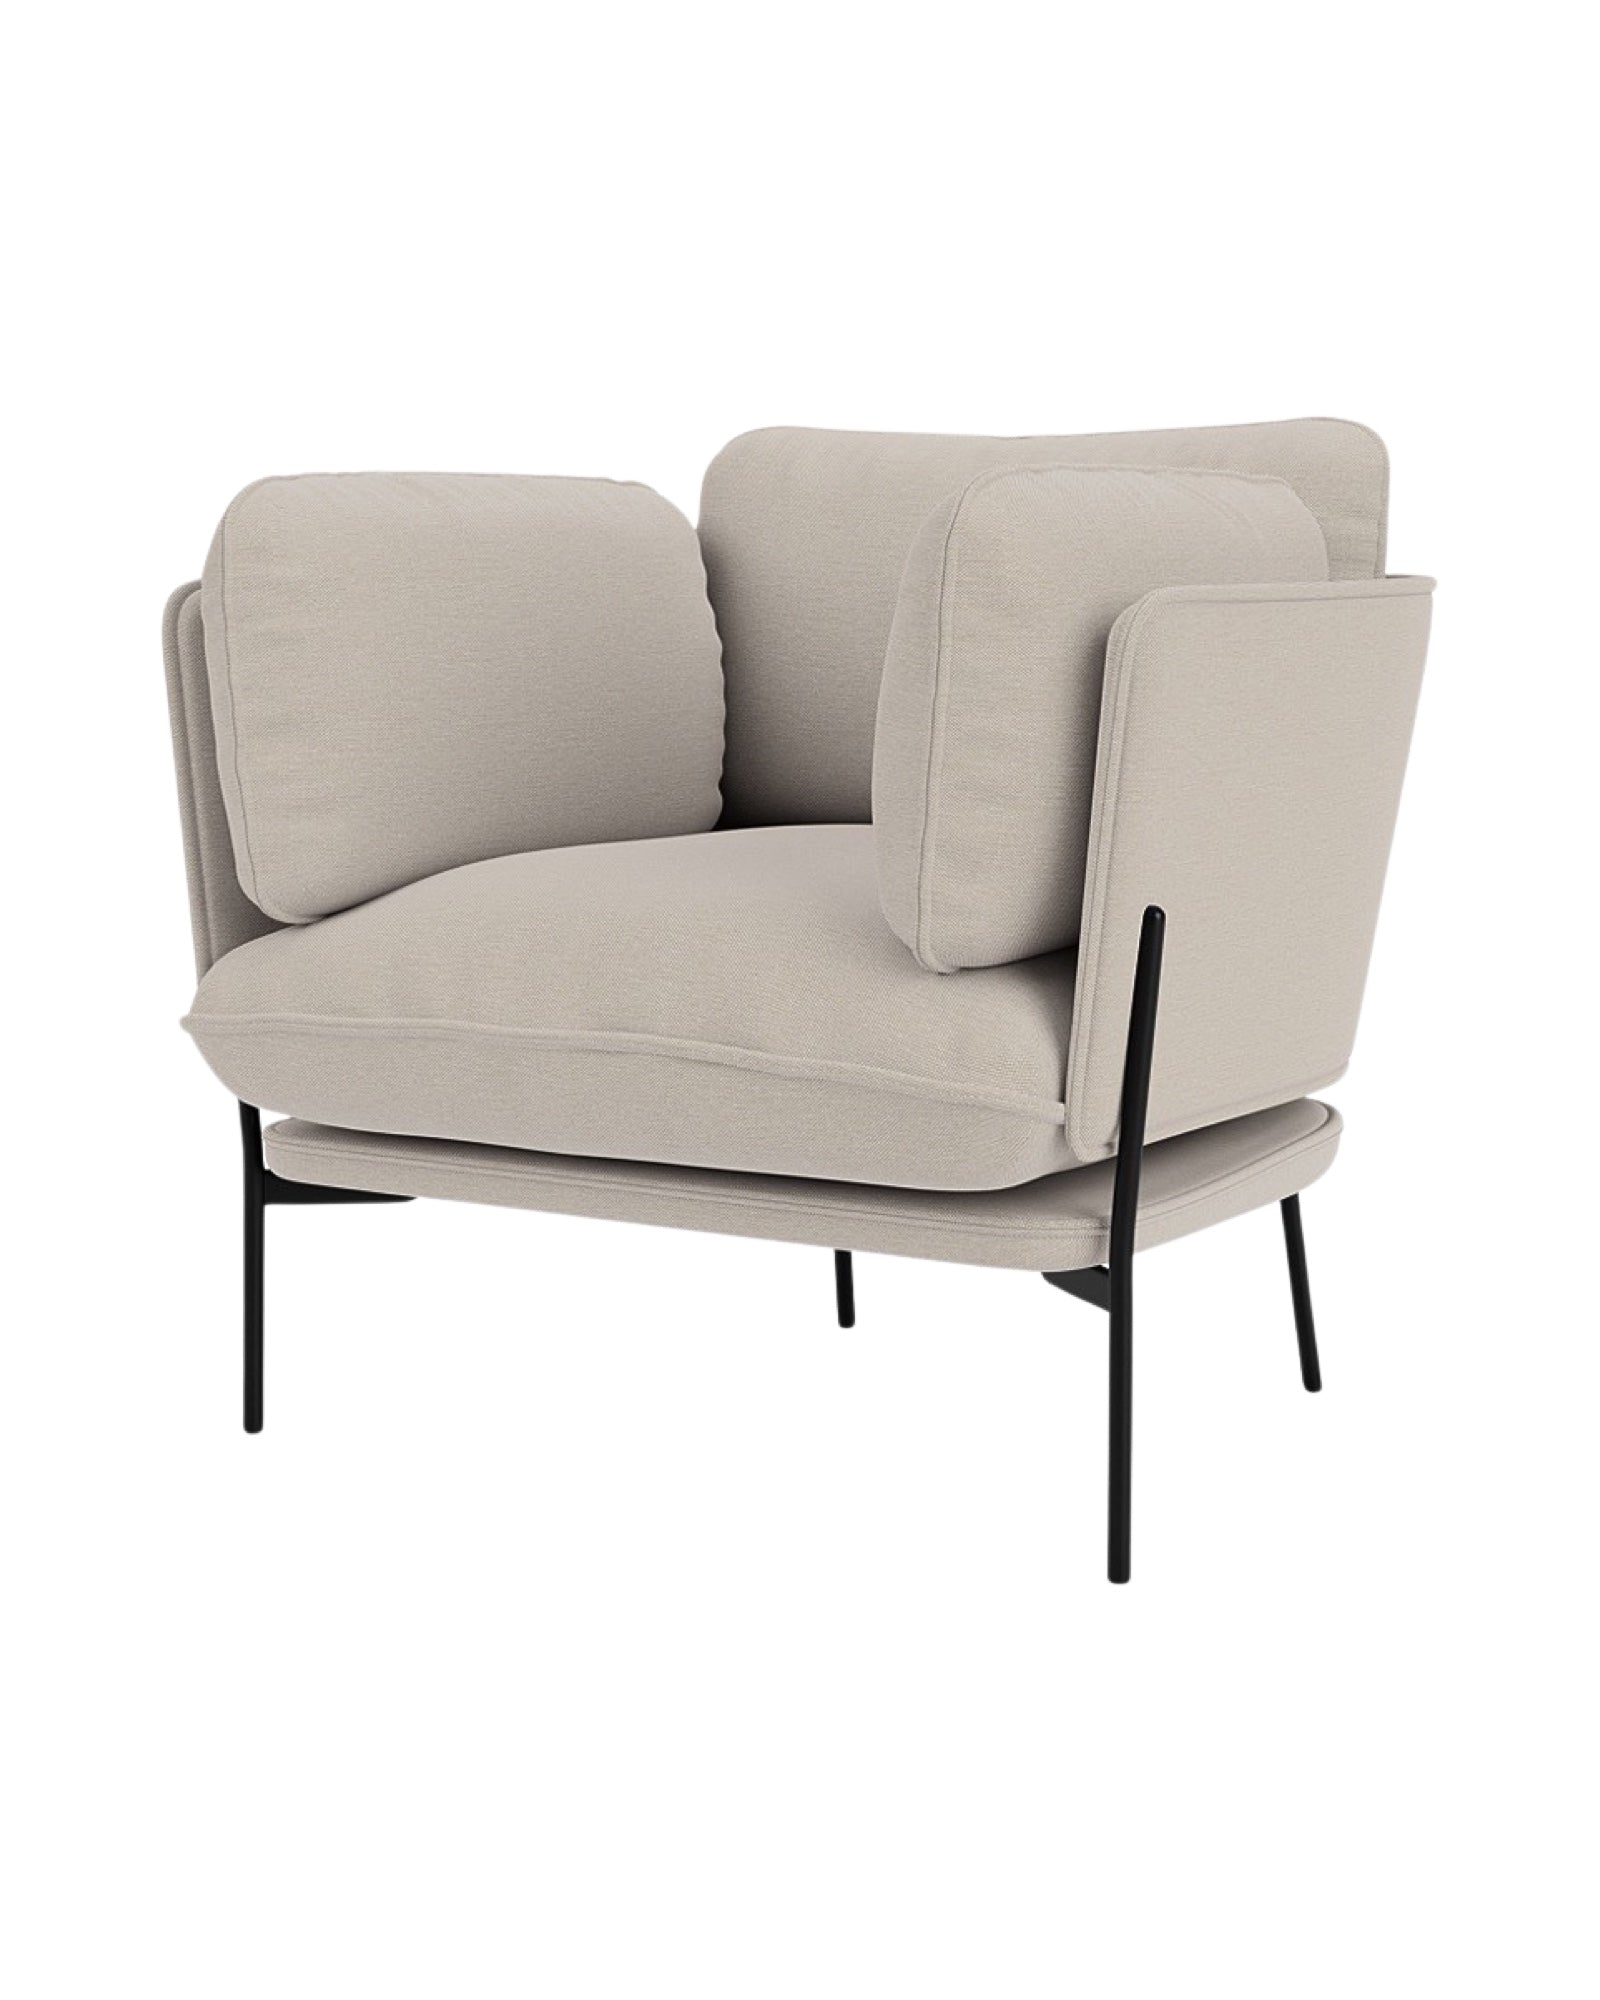 &Tradition Cloud LN1 Lounge Chair